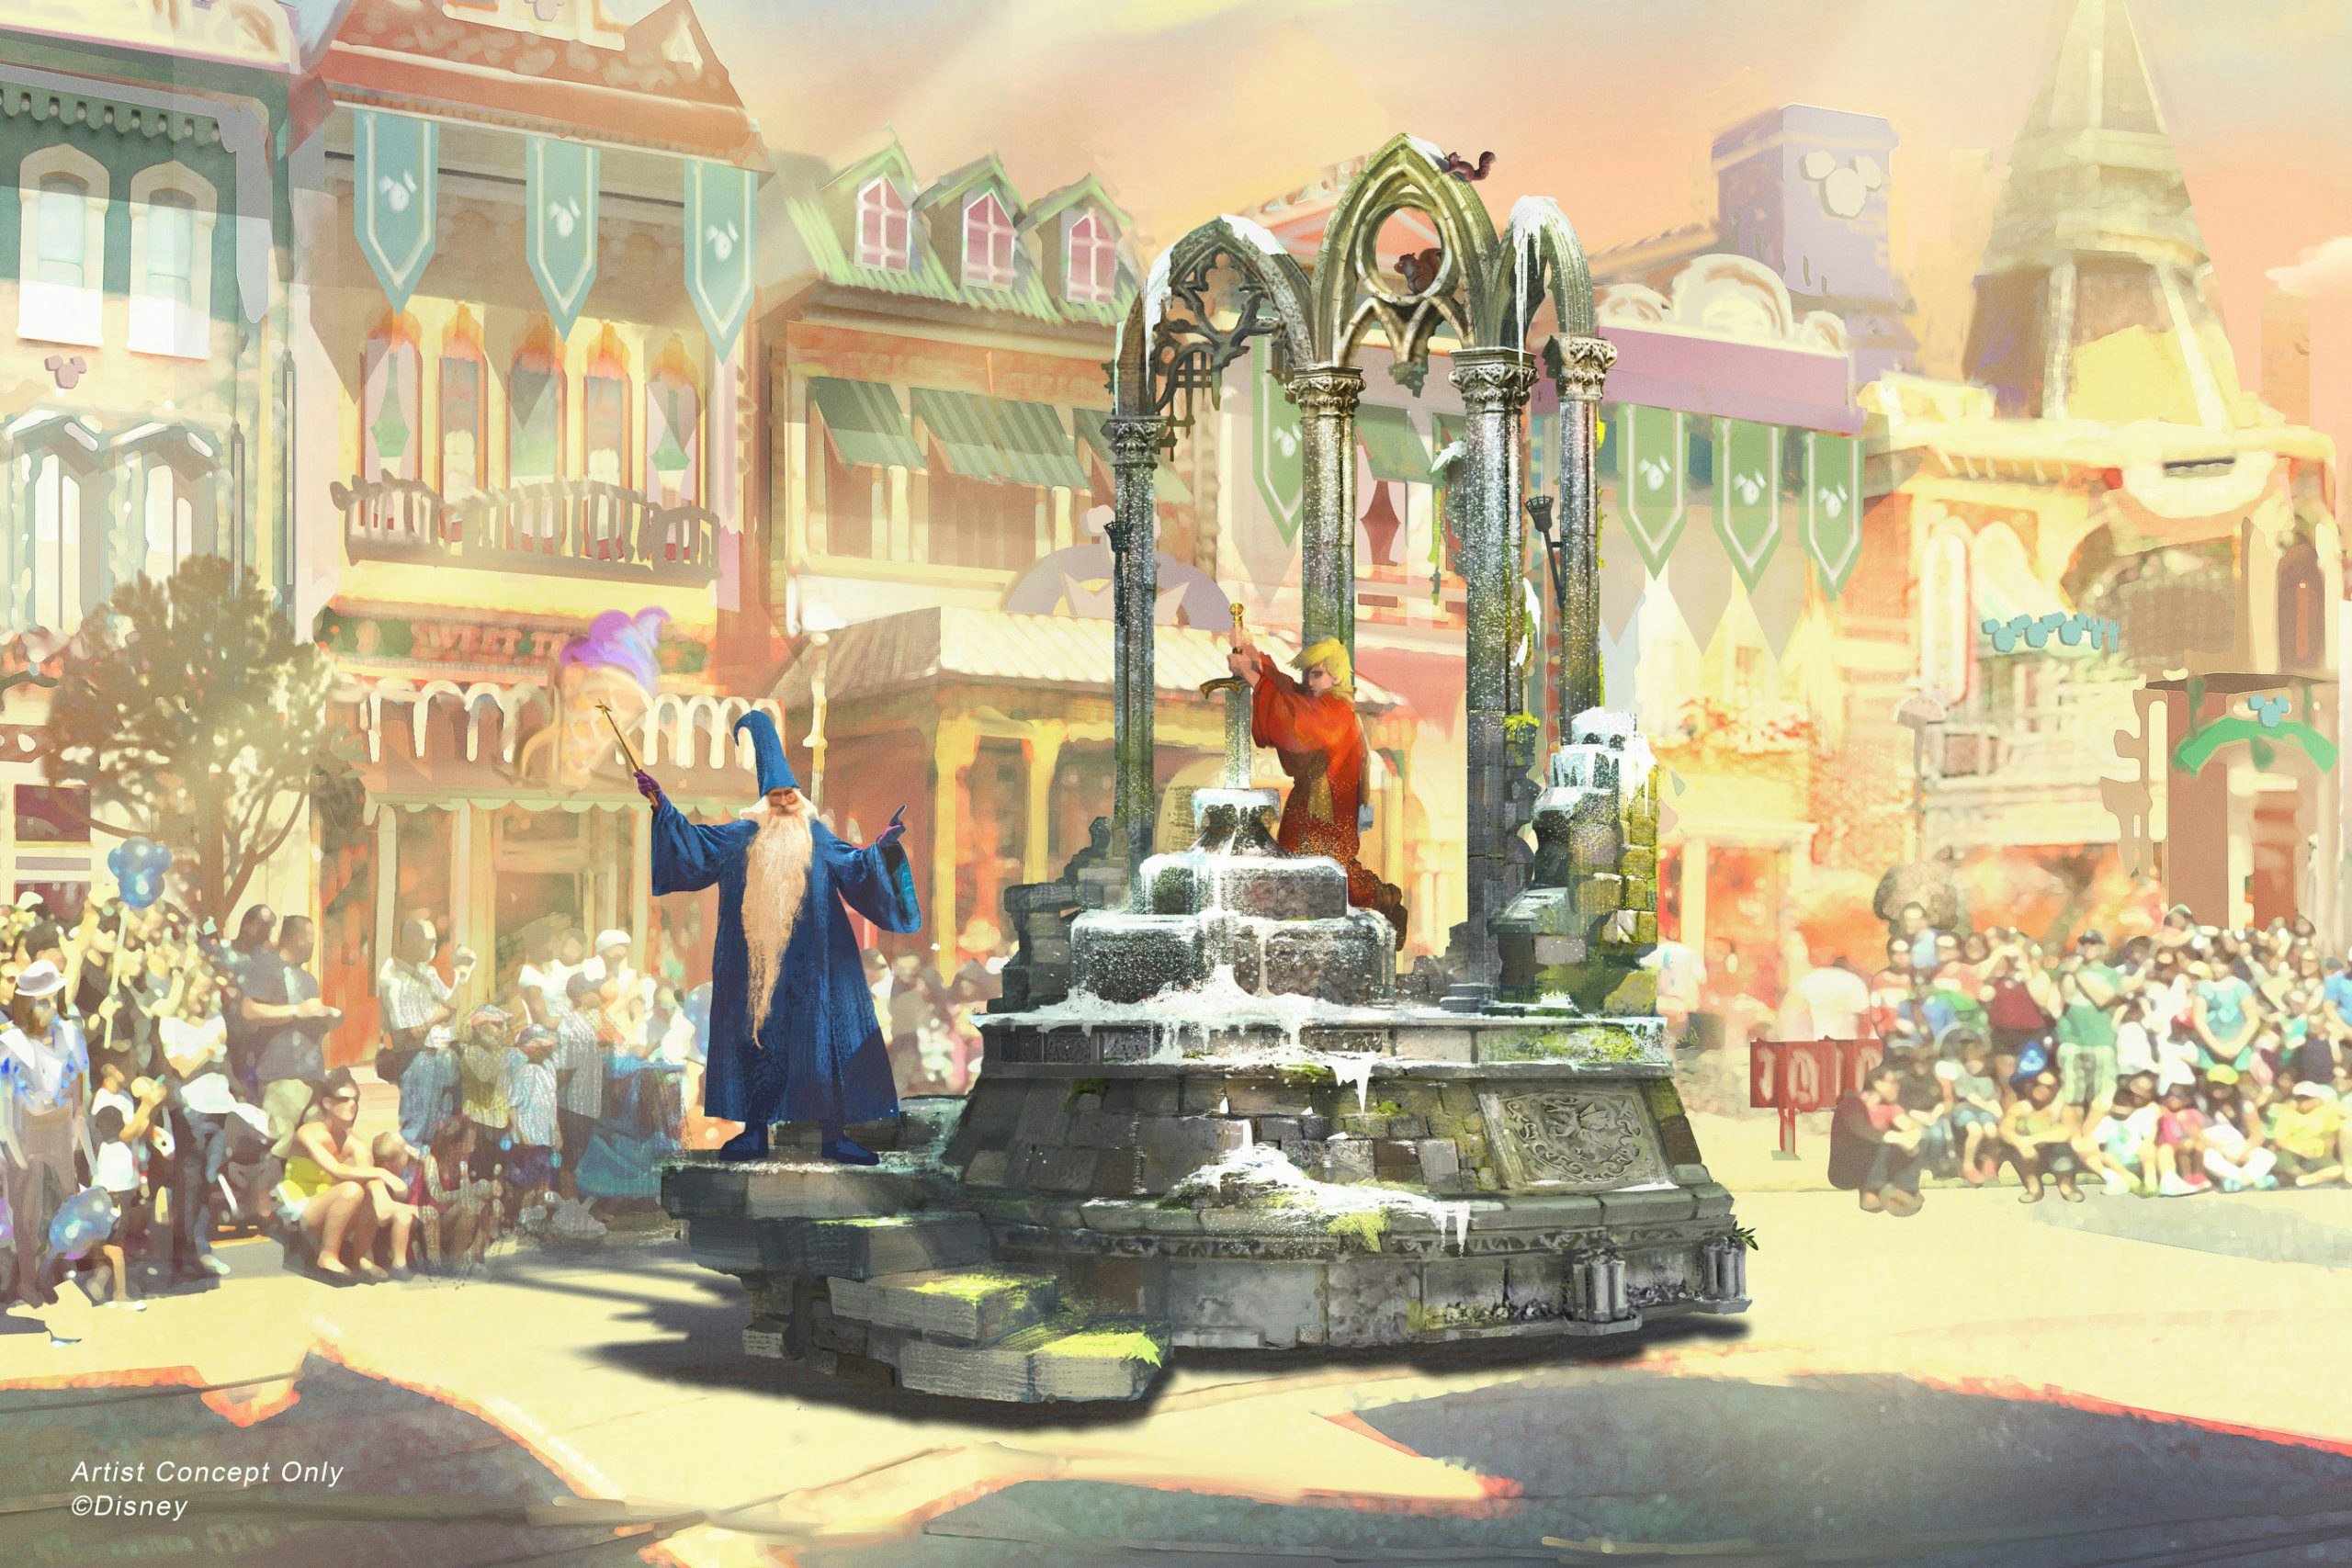 Set to debut Feb. 28, 2020, at Disneyland Park in California, the new “Magic Happens” parade will celebrate the awe-inspiring moments of magic that are at the heart of so many Disney stories. This new daytime spectacular will feature stunning floats, beautiful costumes, and beloved Disney characters. Depicted in this image, Merlin from “The Sword in the Stone” wisely leads the way for young Arthur, who finds the magic within himself as he pulls the sword from the stone, claiming his place upon the throne.  